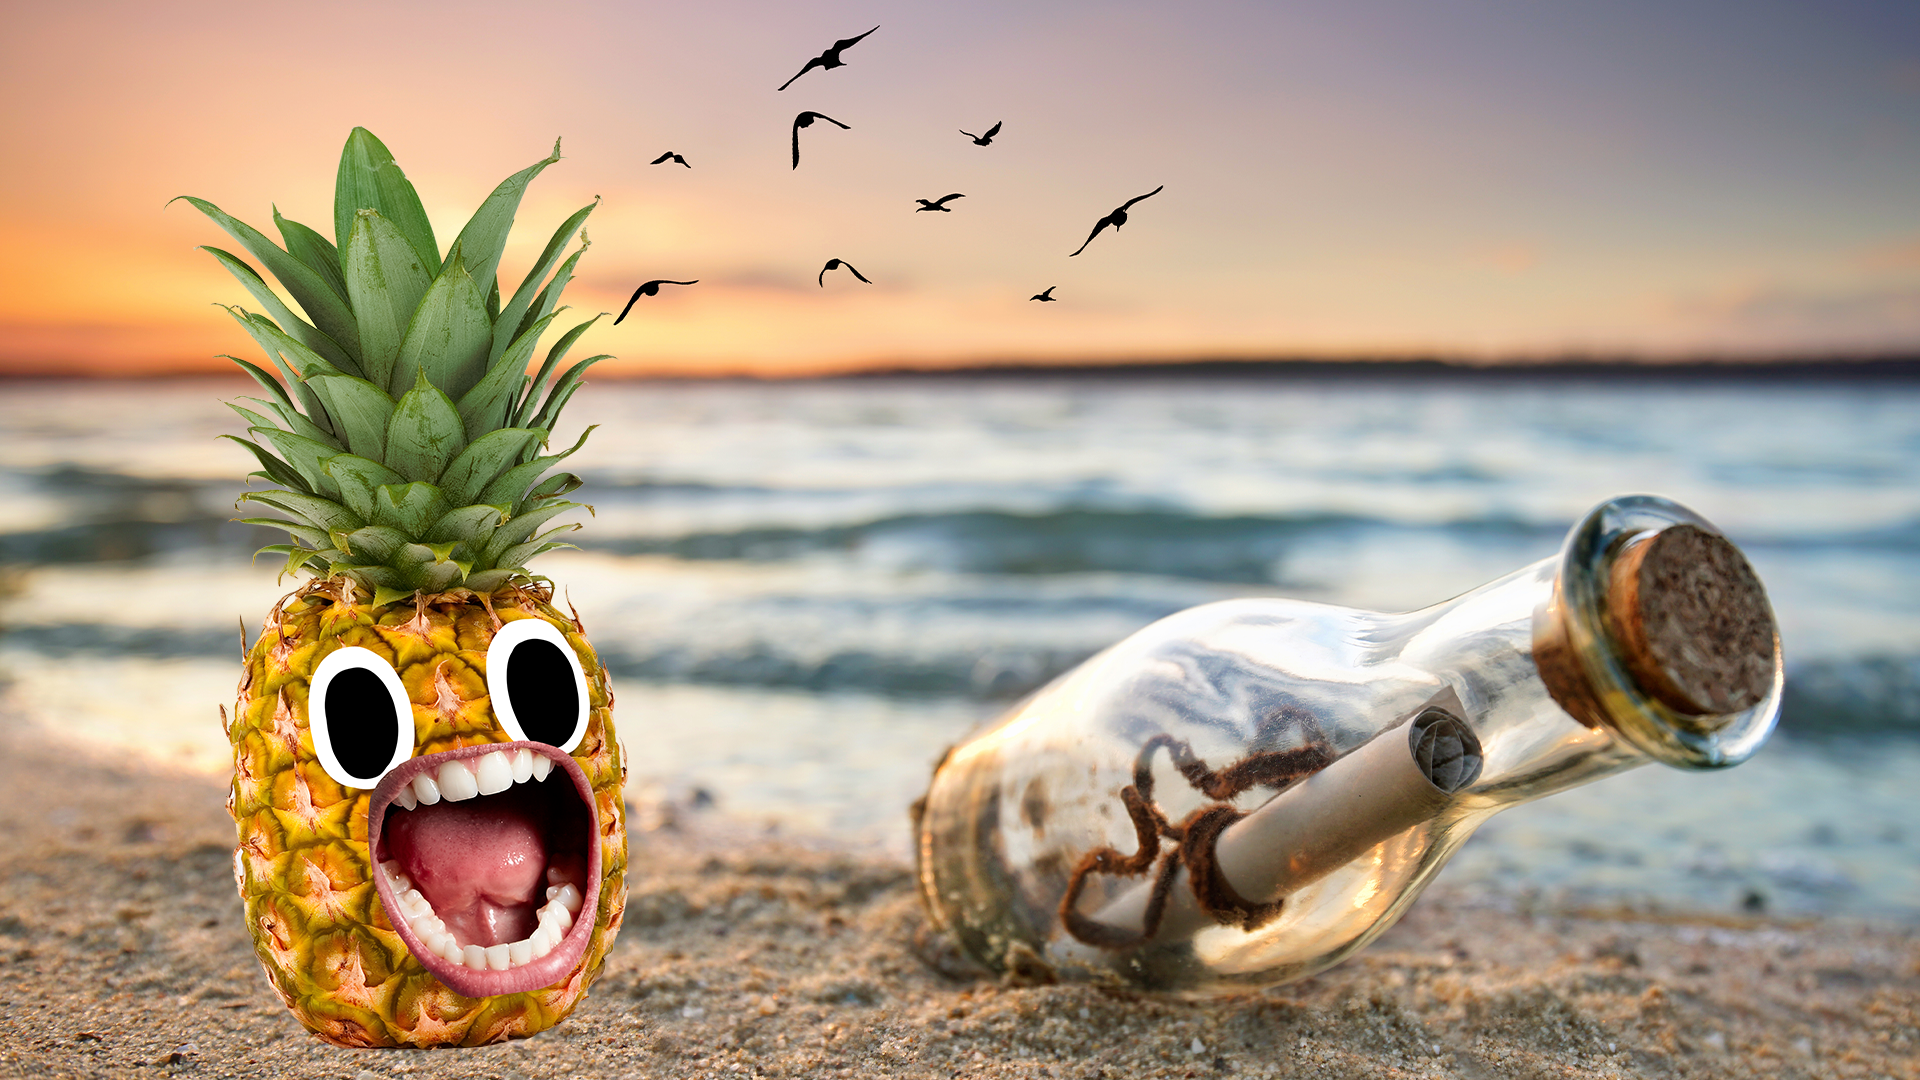 Screaming pineapple and message in bottle on beach